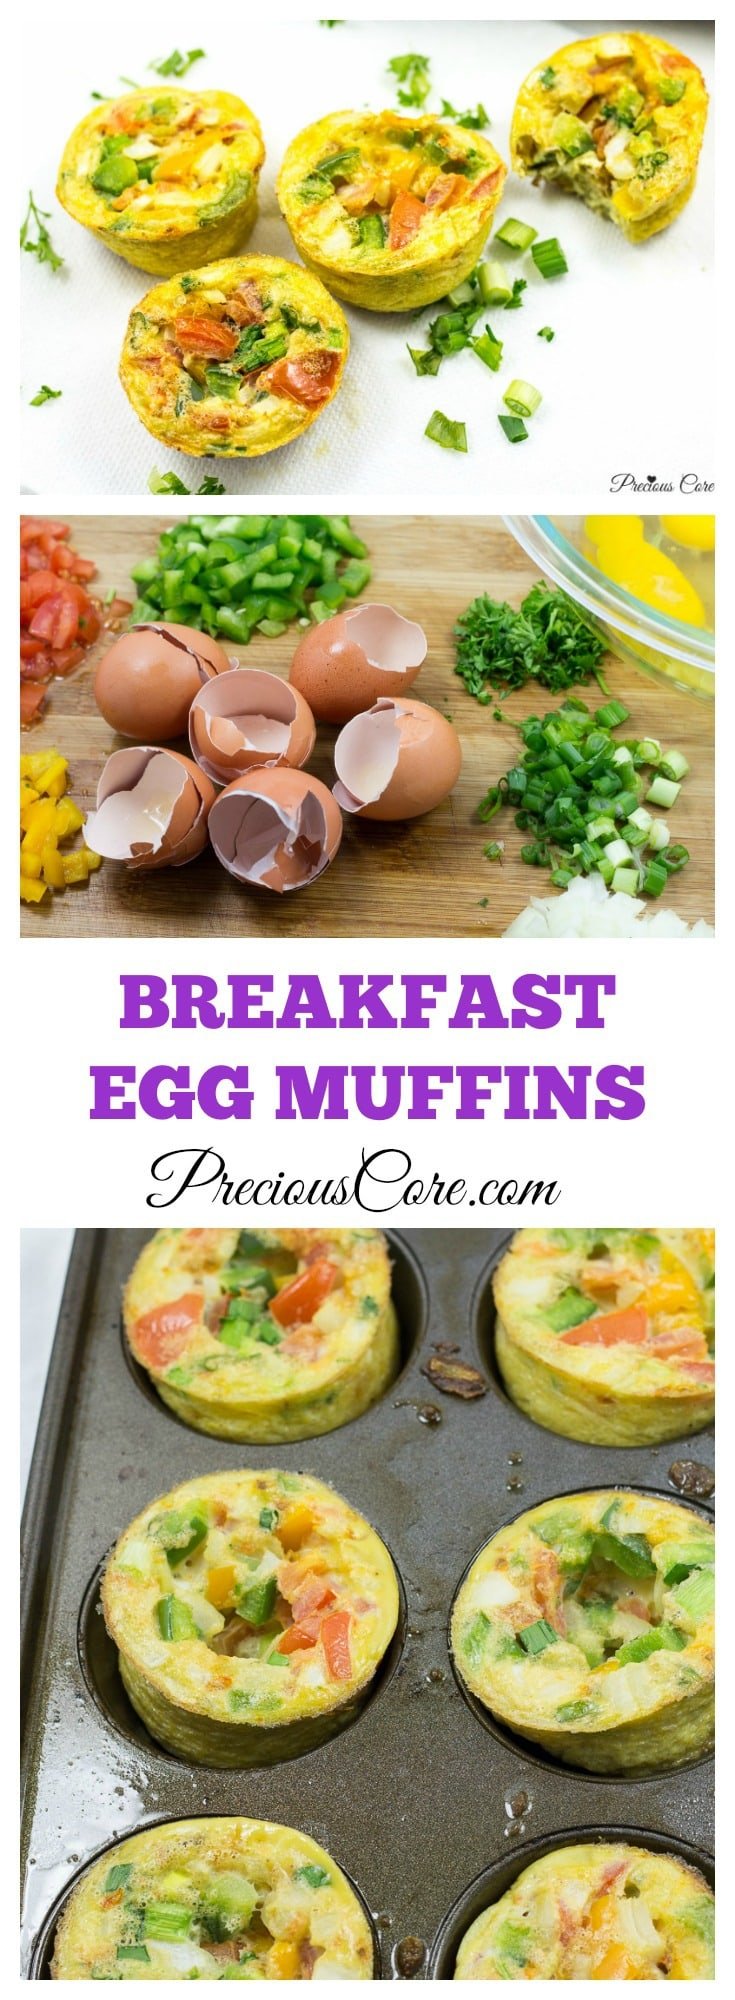 How to make breakfast egg muffins